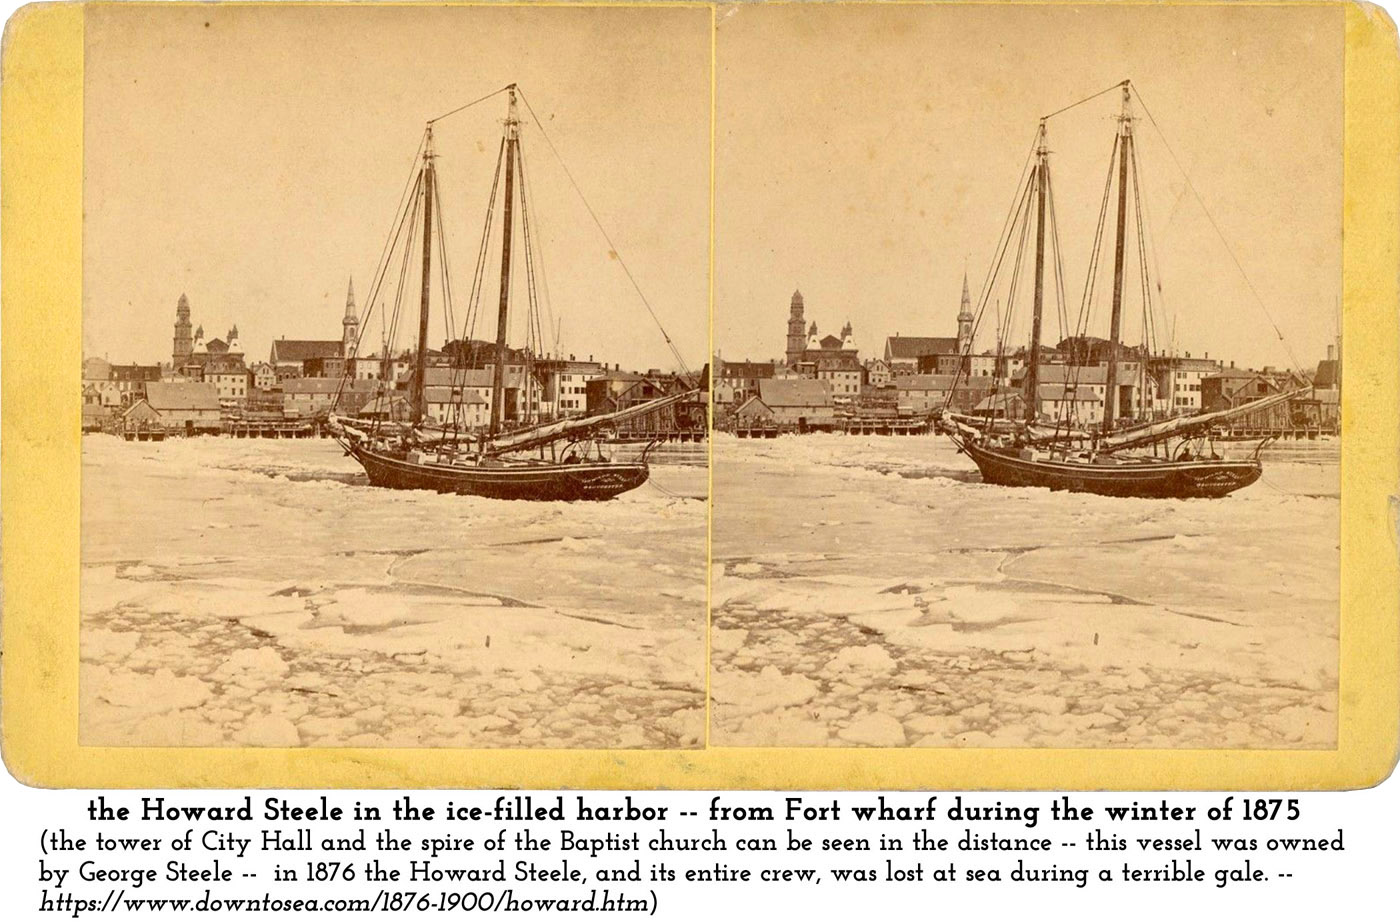 1875 - the Howard Steele moving through the Frozen Harbor